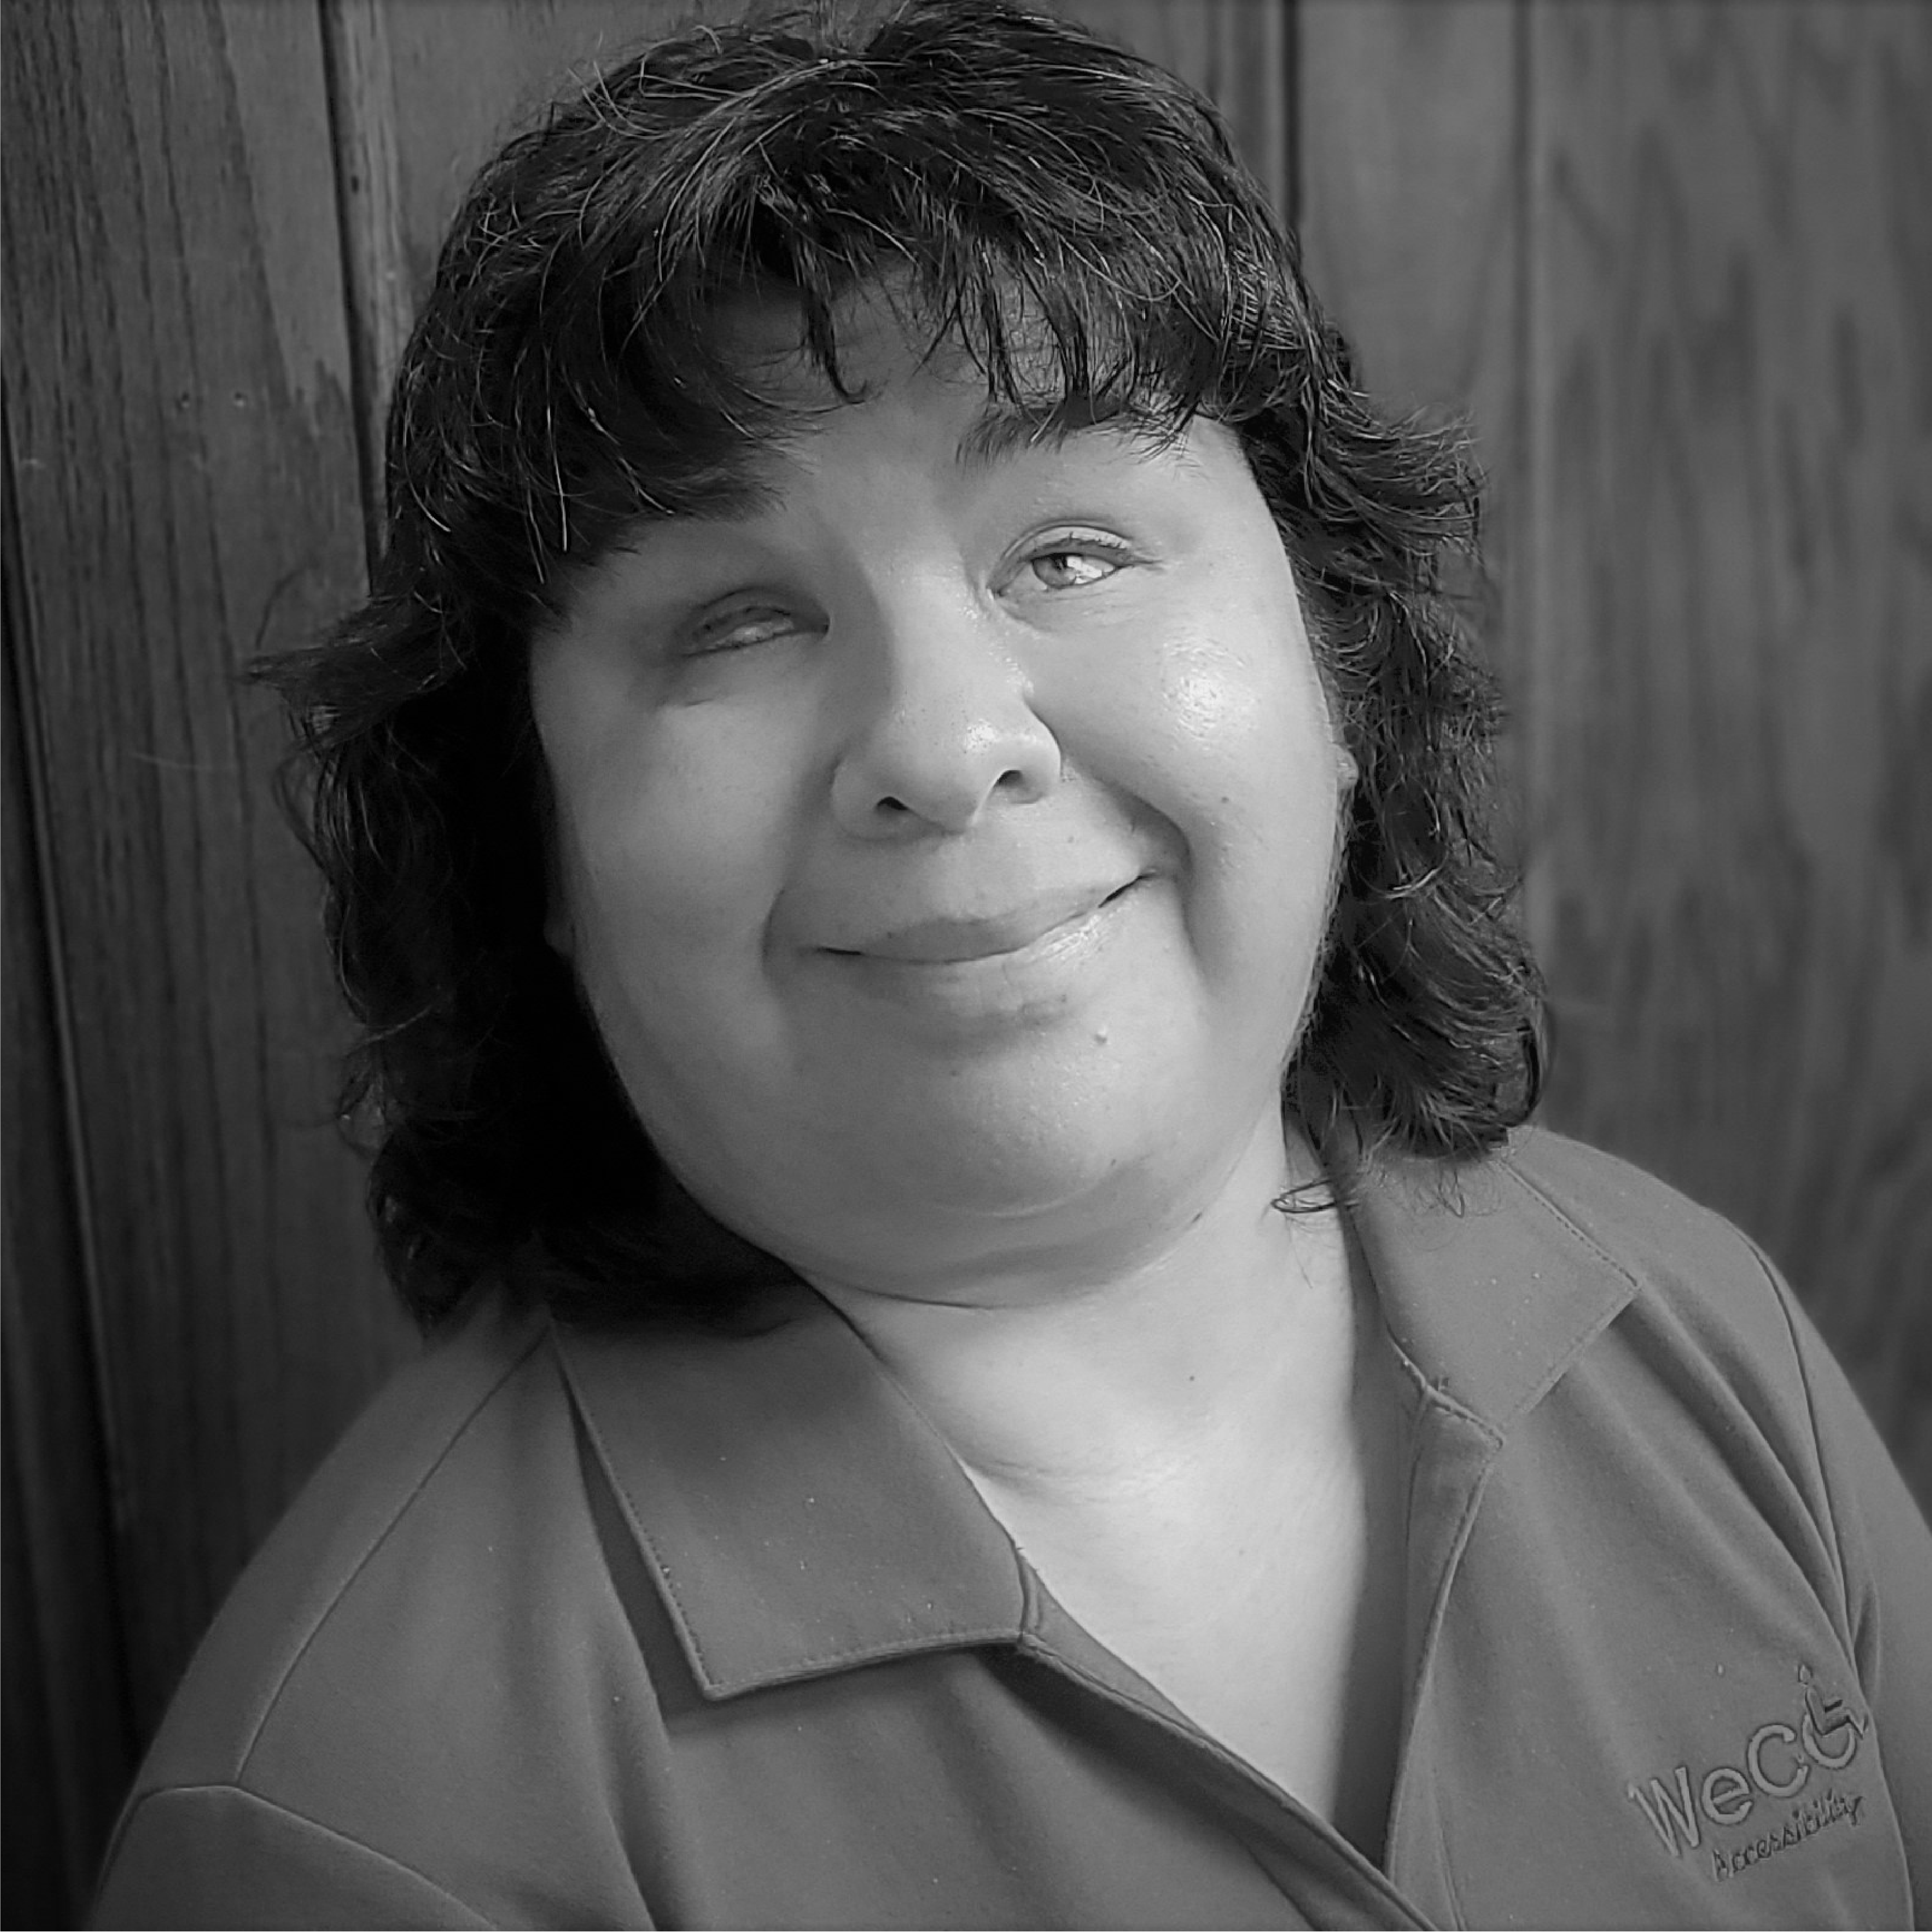 Black and white photo of Sue Ann Rodriquez wearing a collared polo and smiling widely. She has dark, shoulder length, wavy hair.